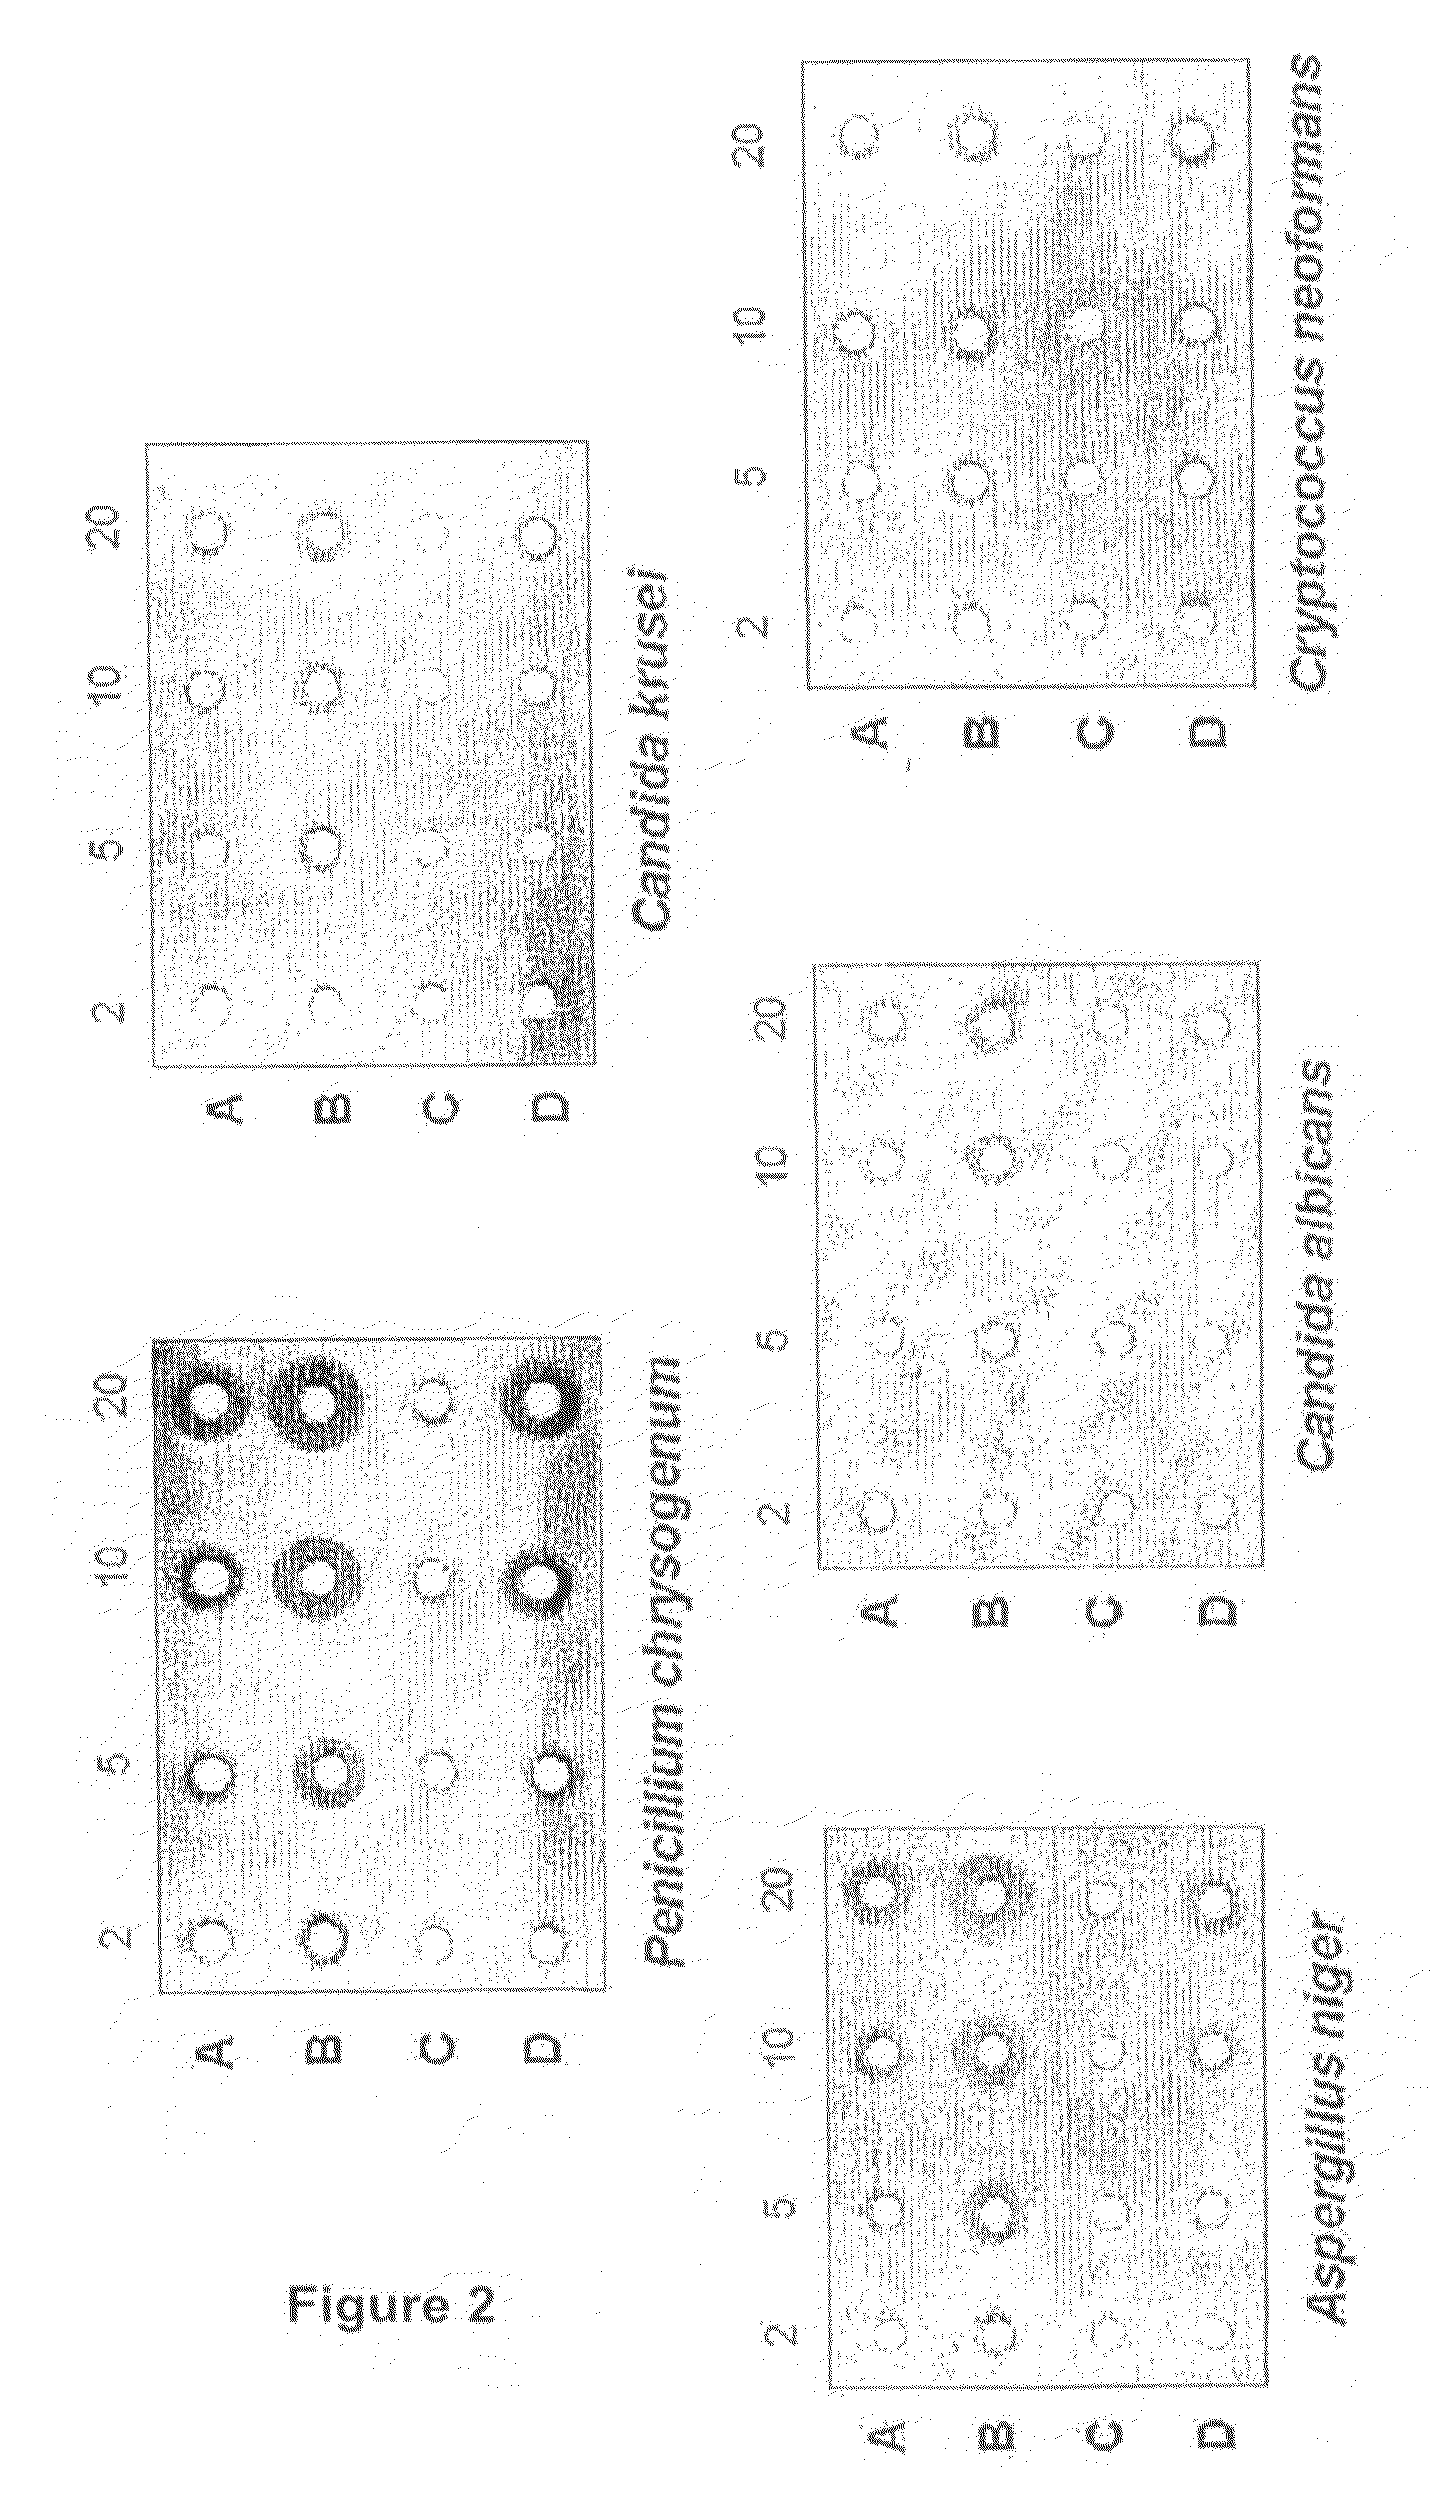 Polyene Antibiotics, Compositions Containing Said Antibiotics, Method and Micro-Organisms Used to Obtain Same and Applications Thereof